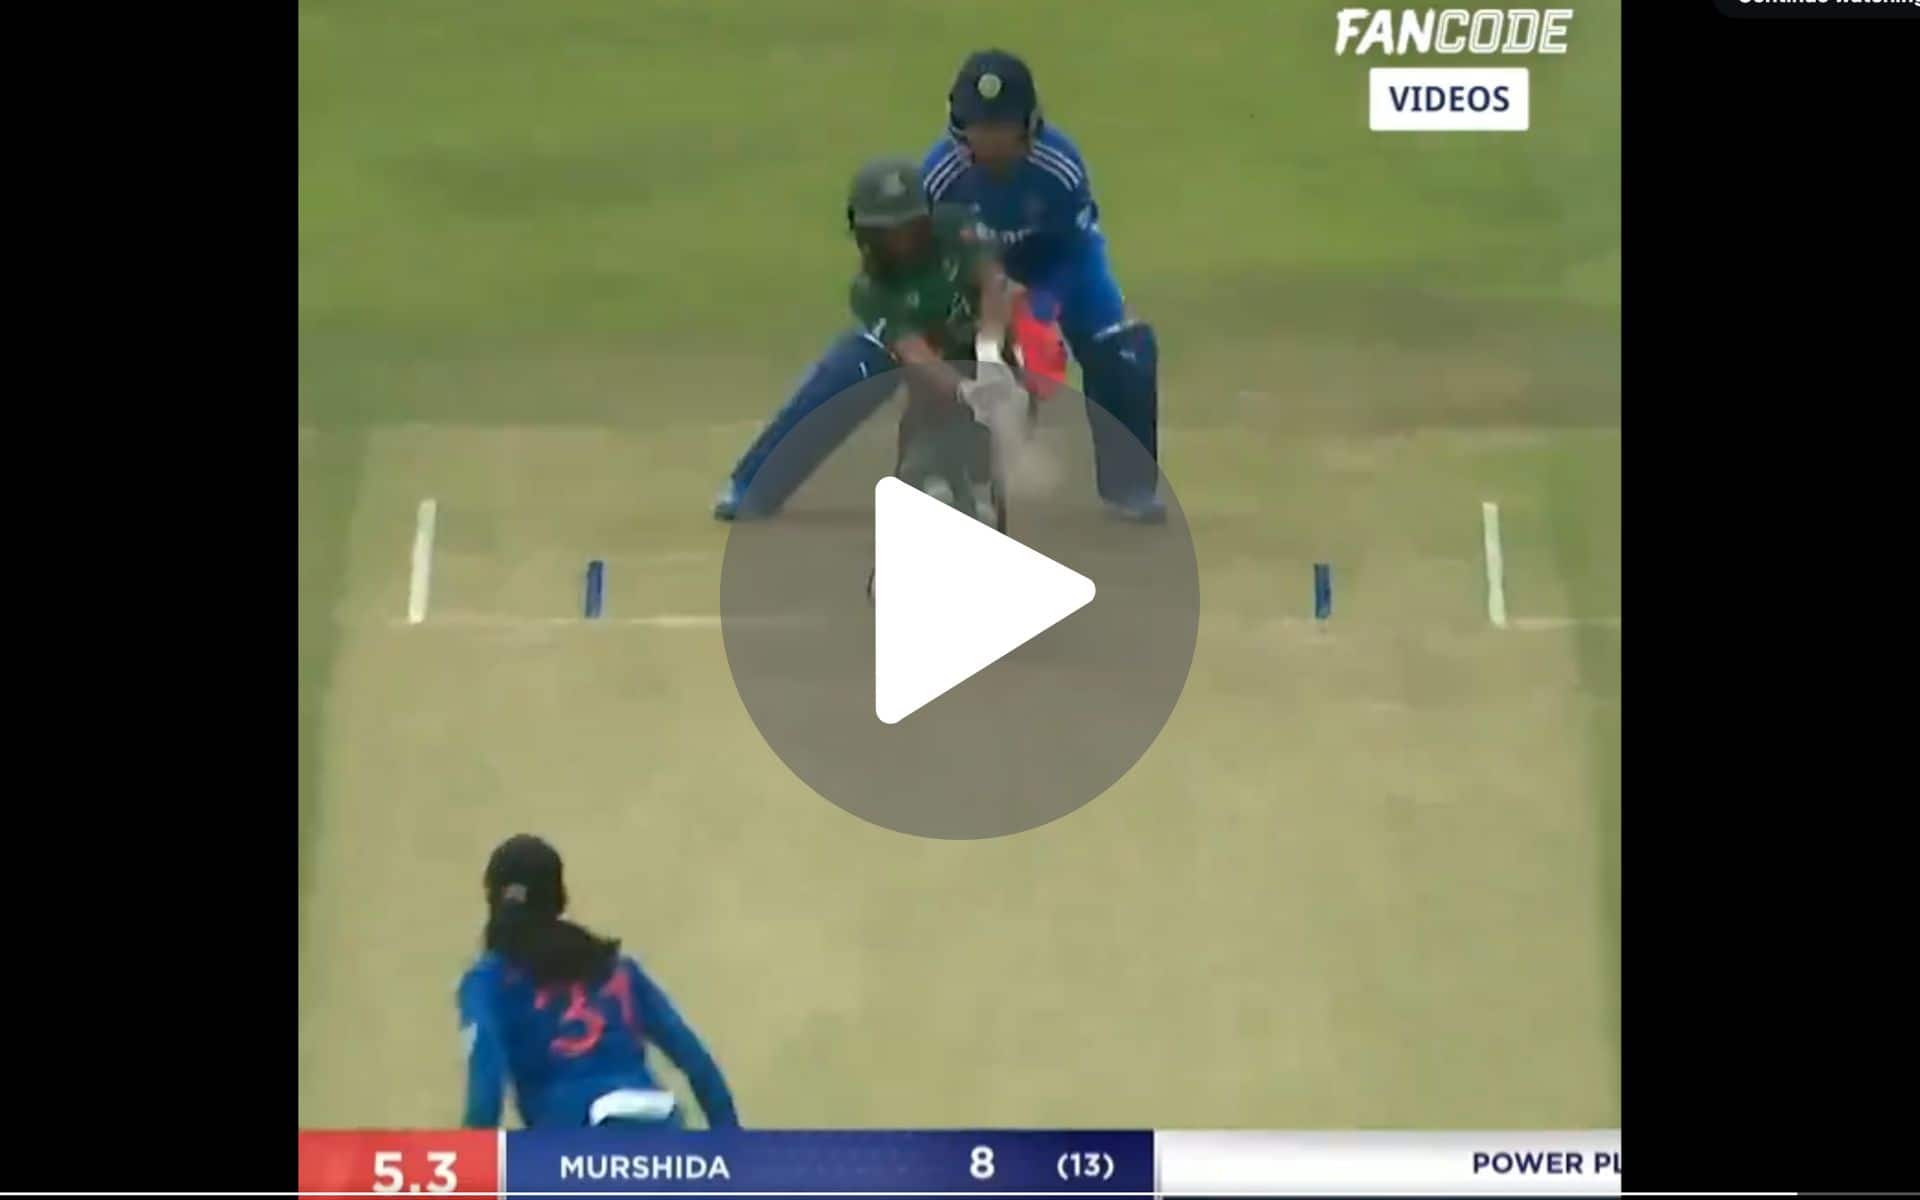 [Watch] Shreyanka Patil Outfoxes Bangladesh's Ace Batter With An Ashwin-Esque Delivery